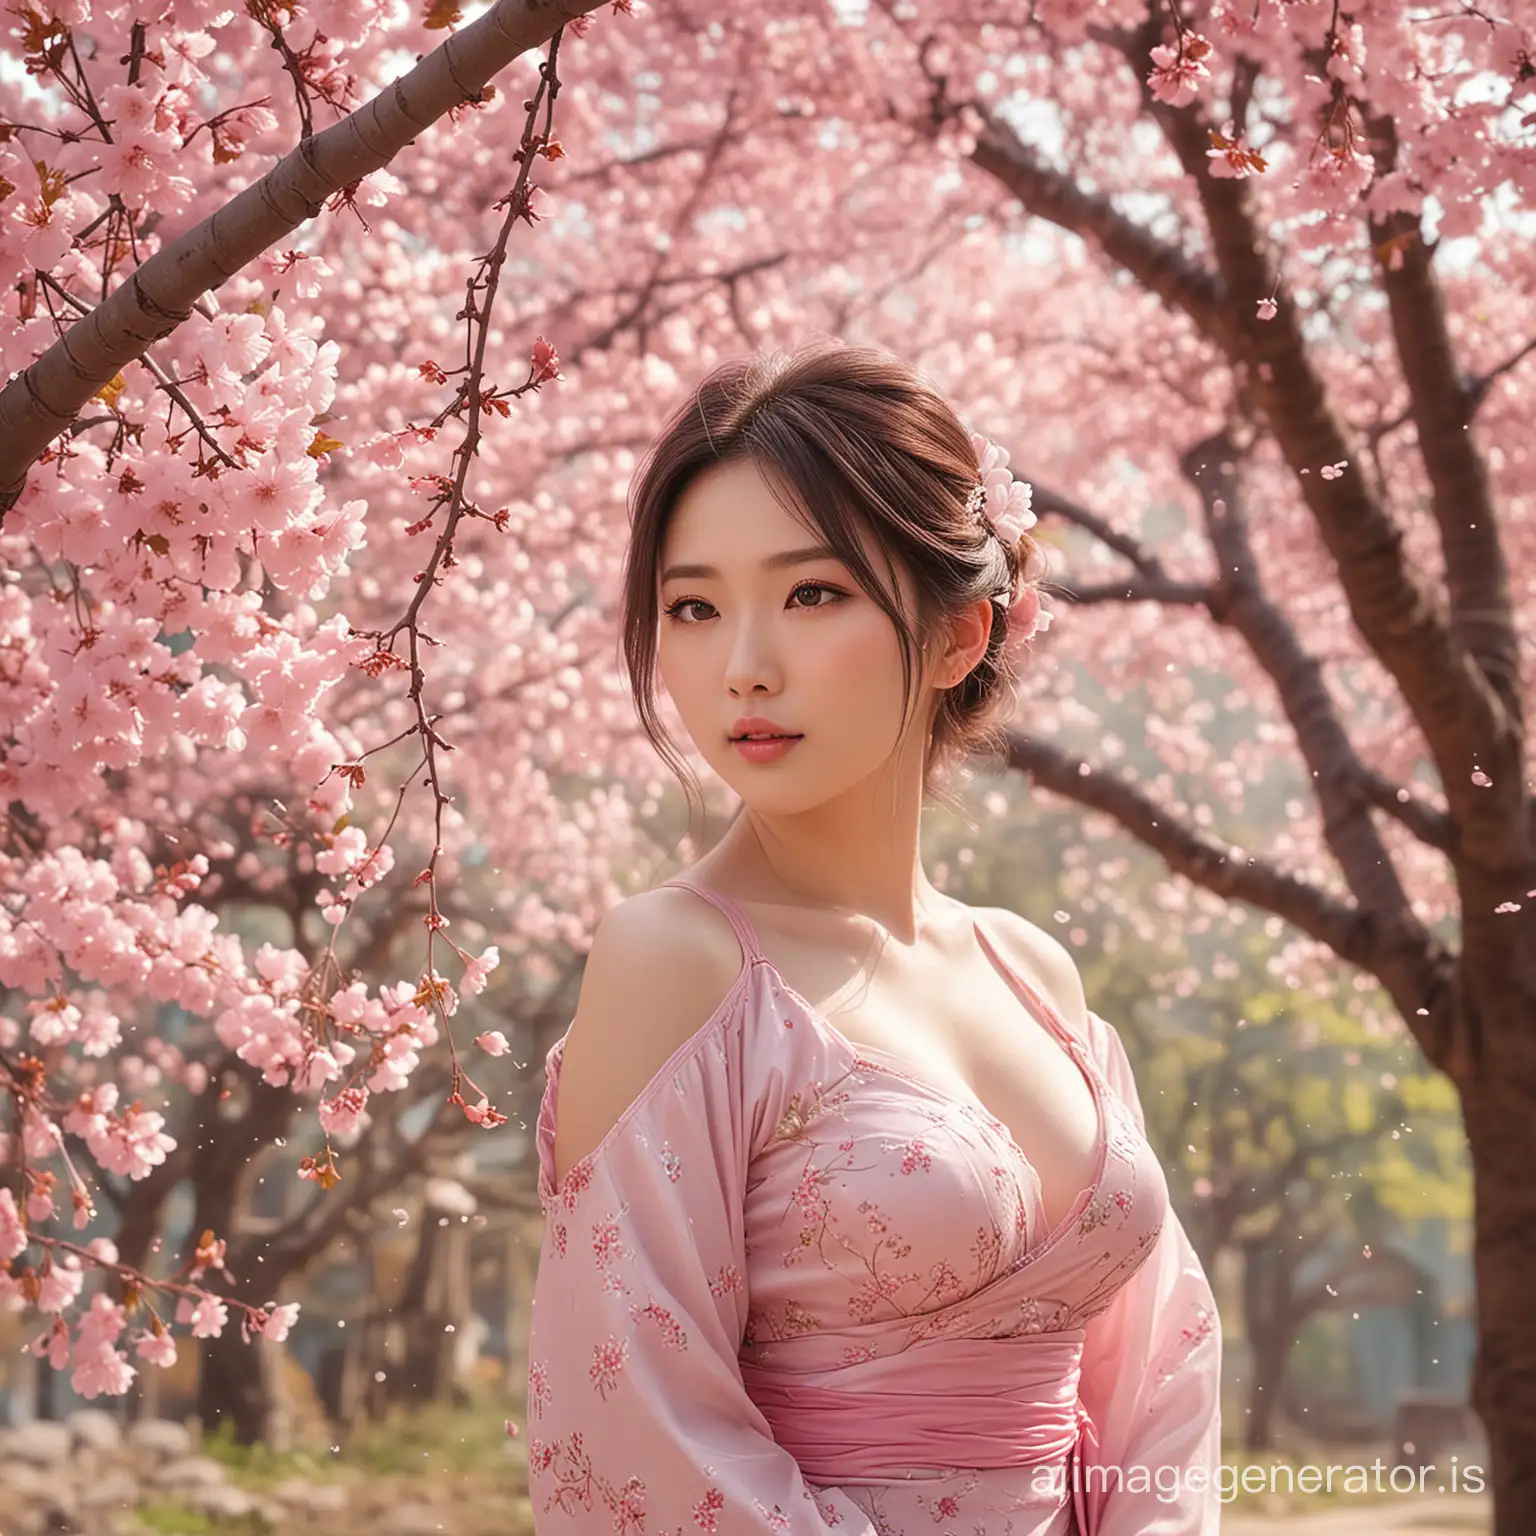 a korean woman, very big breasts, firm breasts,standing under a tree with pink flowers, cherry blossom background, realistic fantasy photography, cherry blossom petals, beautiful aerith gainborough, cherry blossoms blowing in the wind, beautiful fantasy girl, cherry blossoms, cherry blossoms, cherry blossoms in the background, cherry blossoms, get lost in a dreamy fairy landscape,” beautiful anime woman, ethereal fairy tale, by Anna Katharina Block